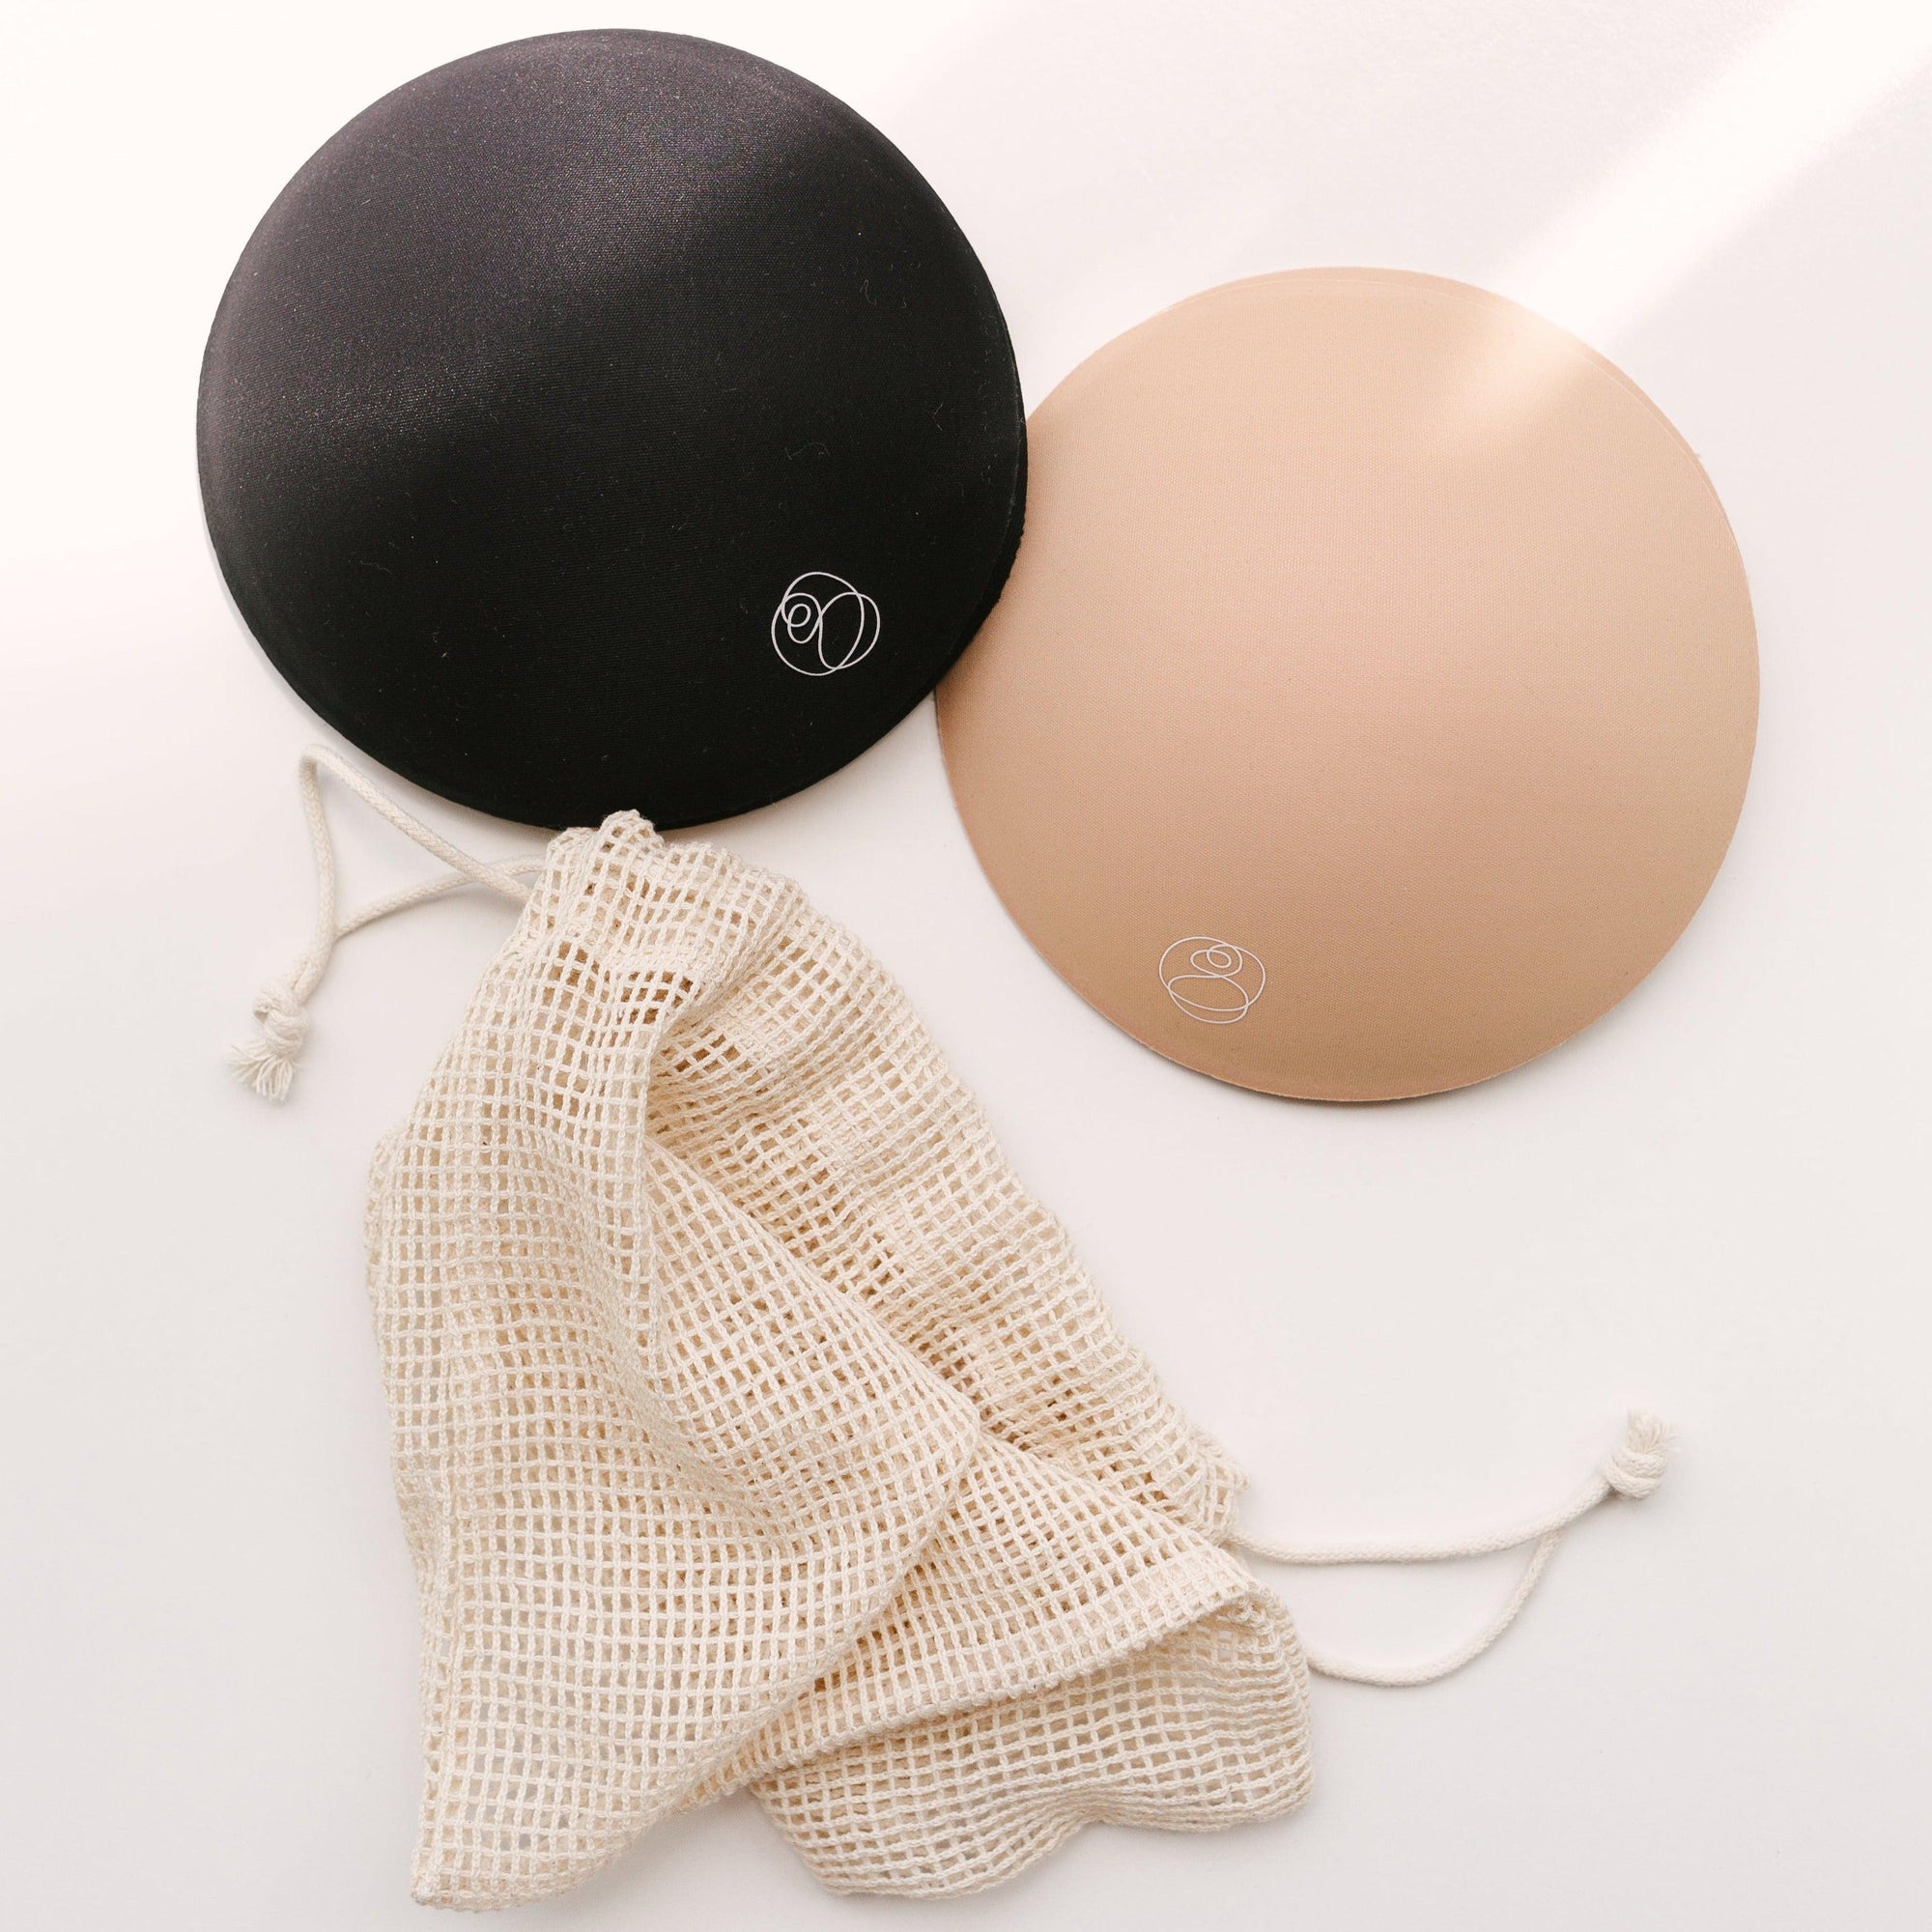 A pair of Ultra Absorbent Breast Pads by Bare Mum for postpartum mothers.